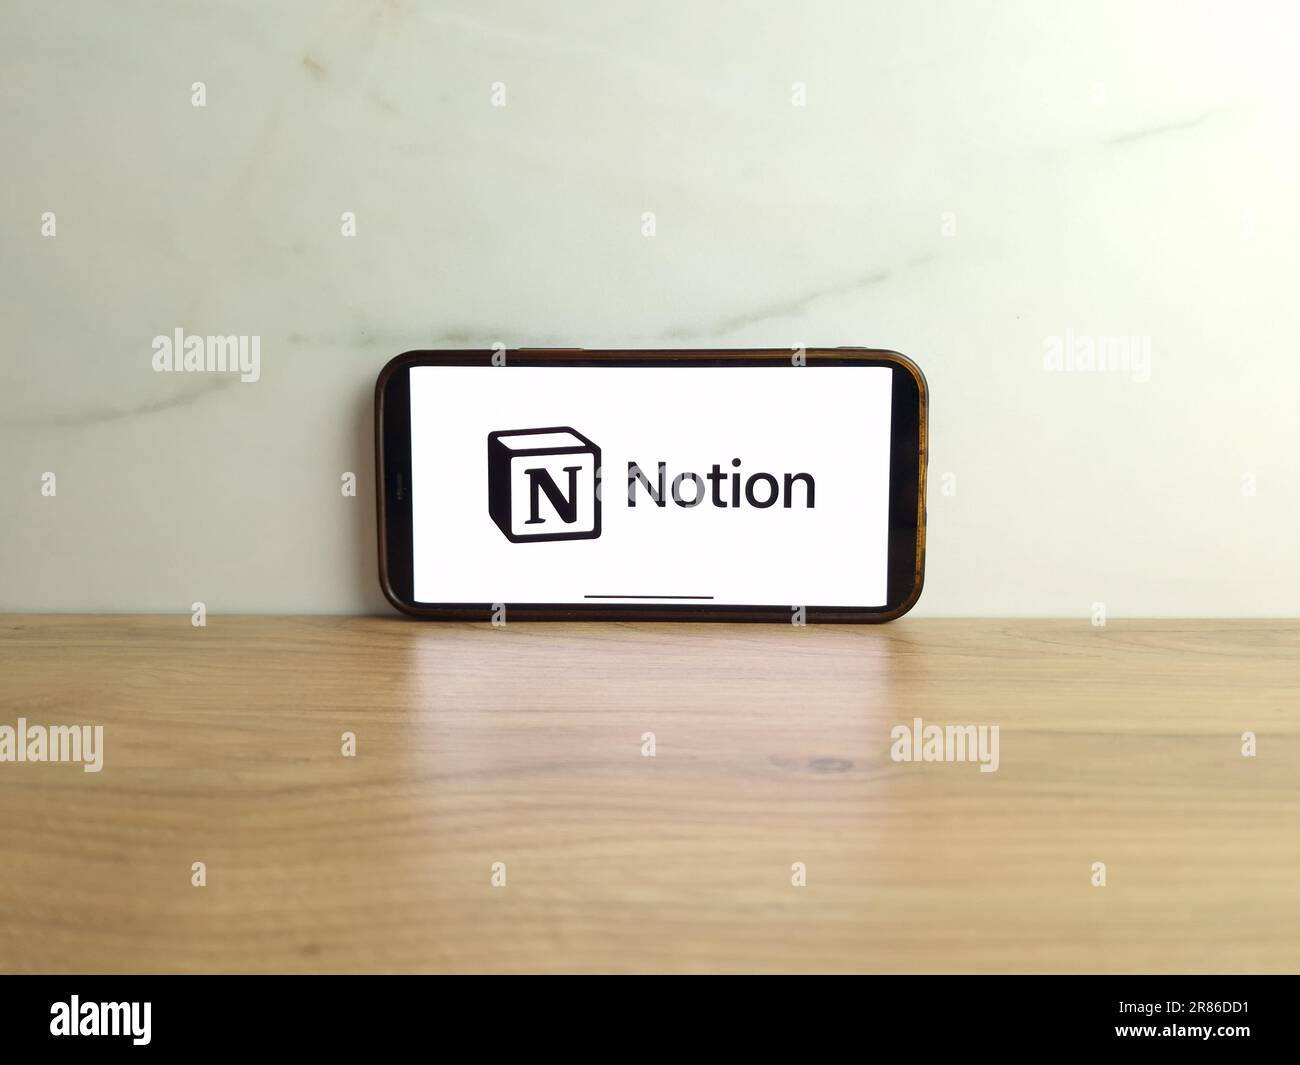 Konskie, Poland - June 17, 2023: Notion productivity software logo displayed on mobile phone screen Stock Photo